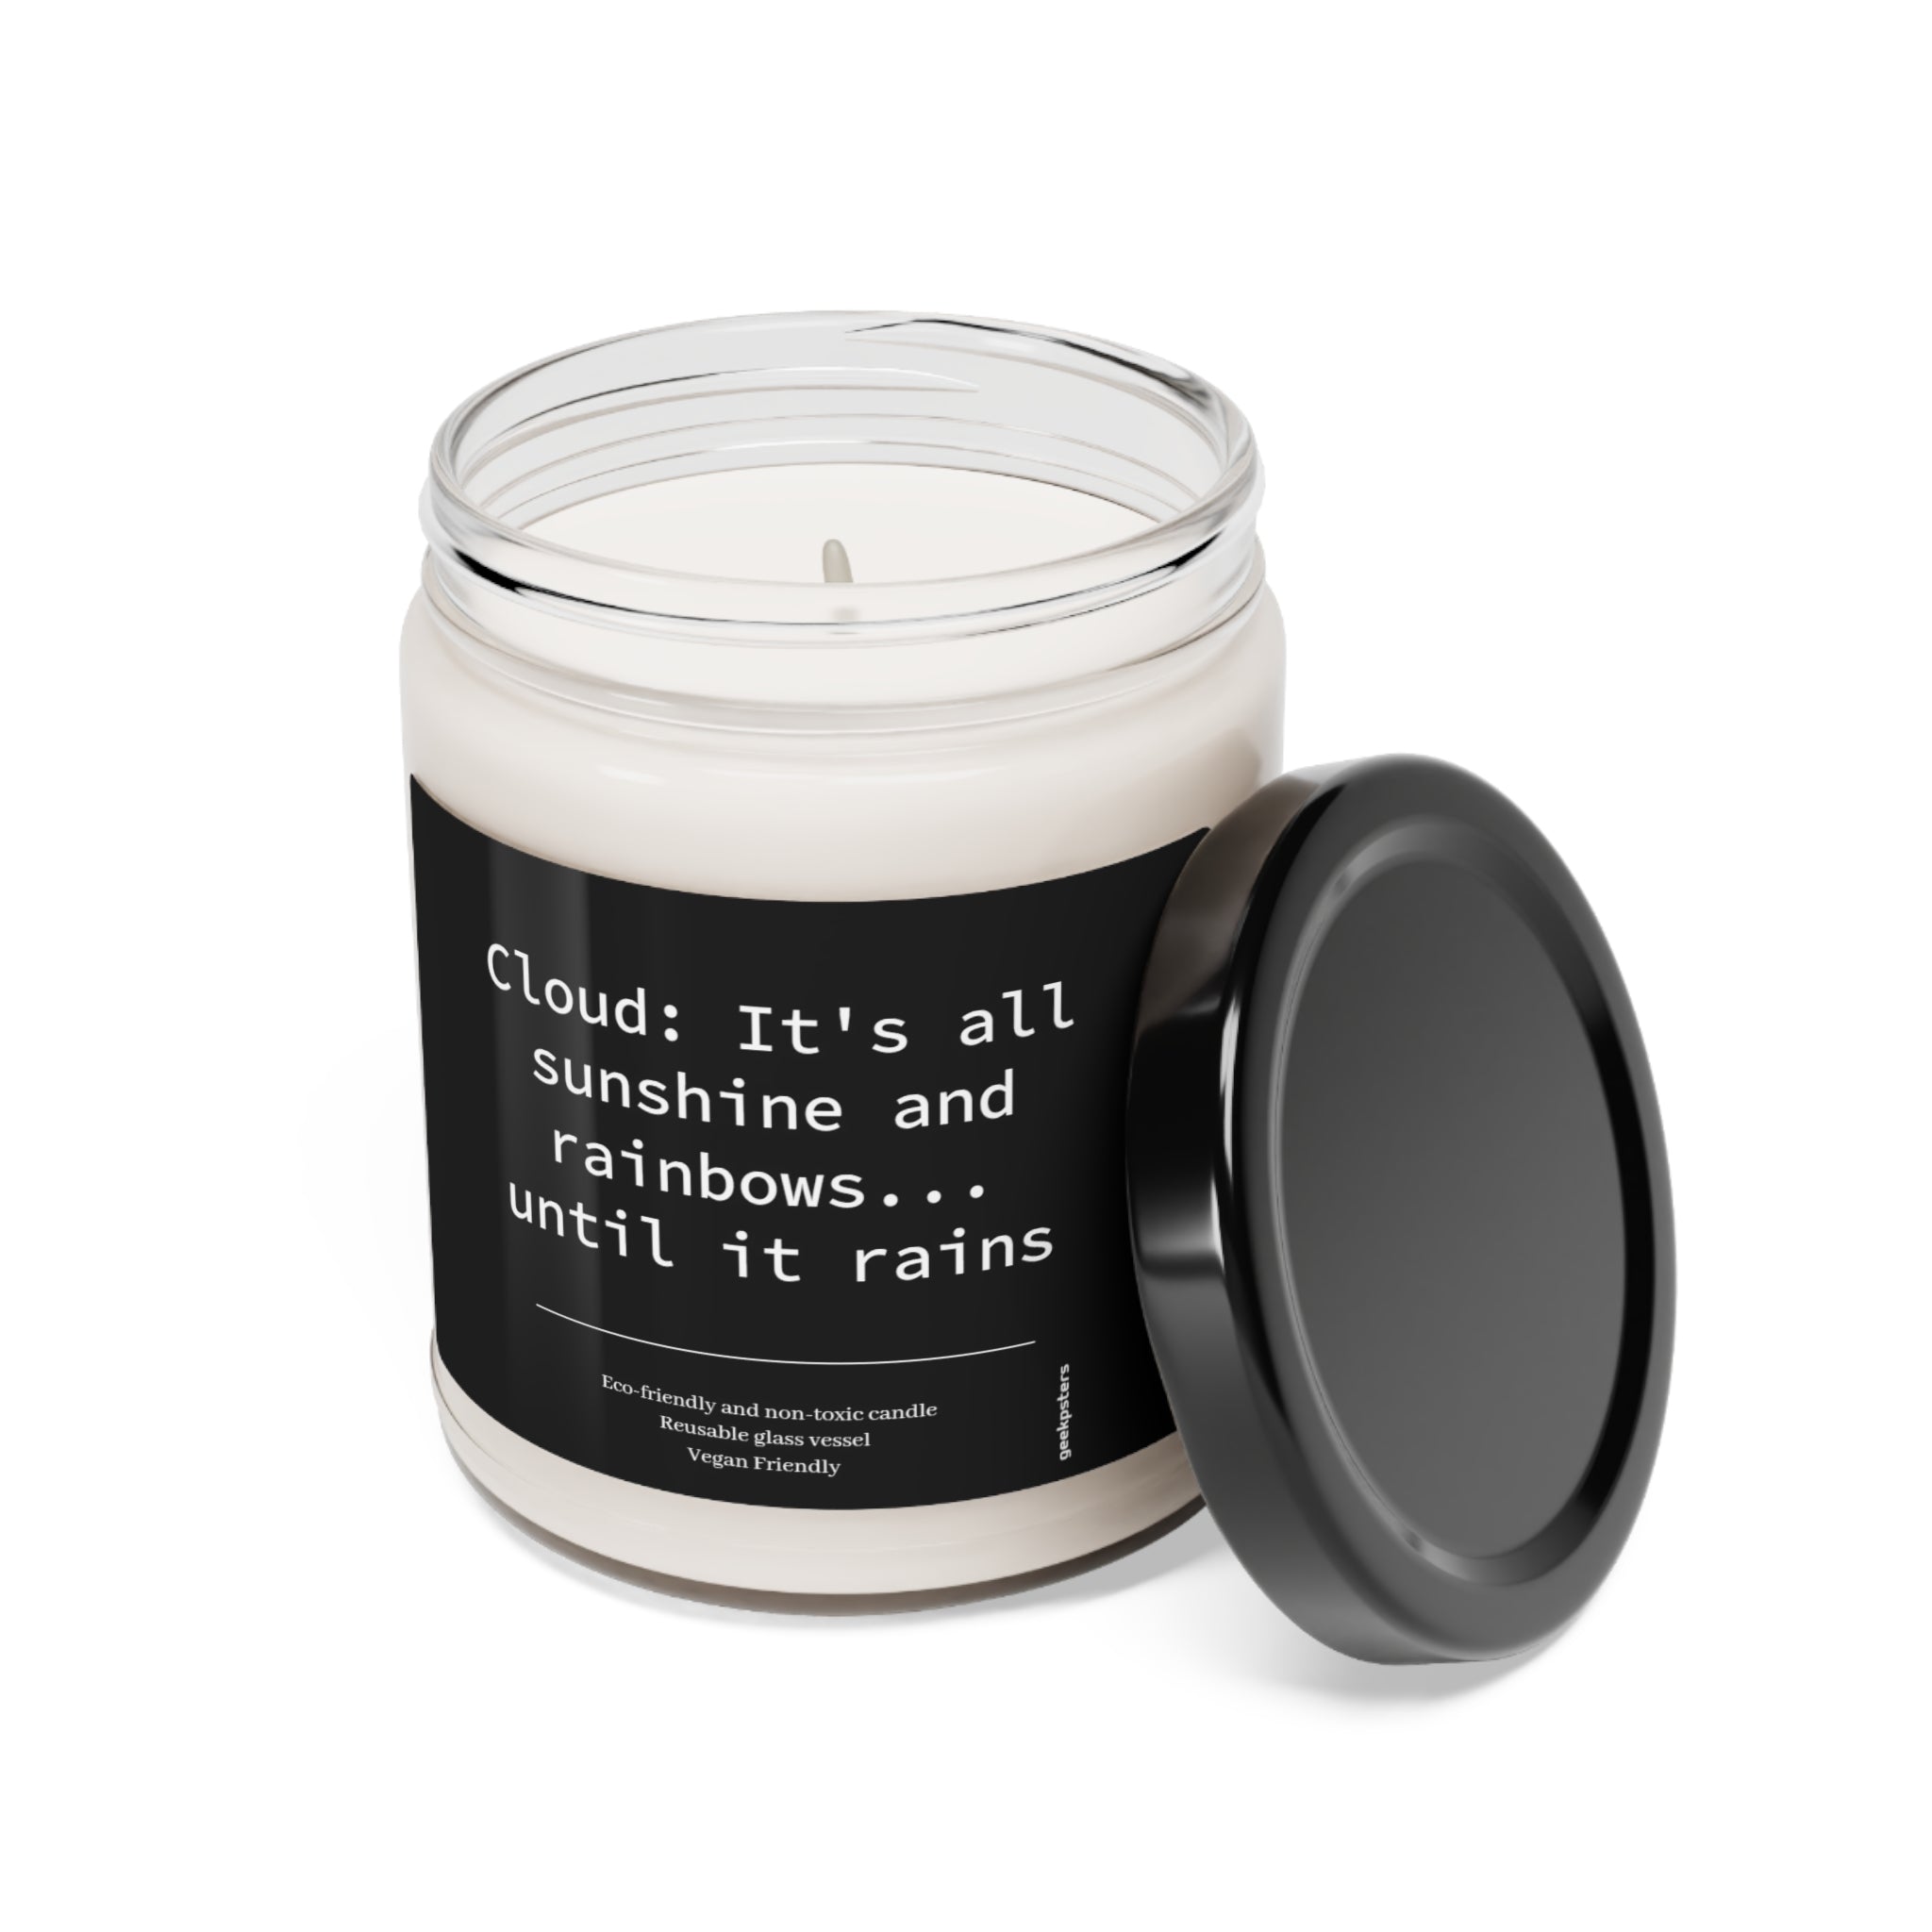 Sentence with product name: Cloud: Its All Sunshine and Rainbow..until its Rain - Scented Soy Candle, 9oz in a glass jar with "cloud: it's all sunshine and rainbows... until it rains" label, isolated on white background.